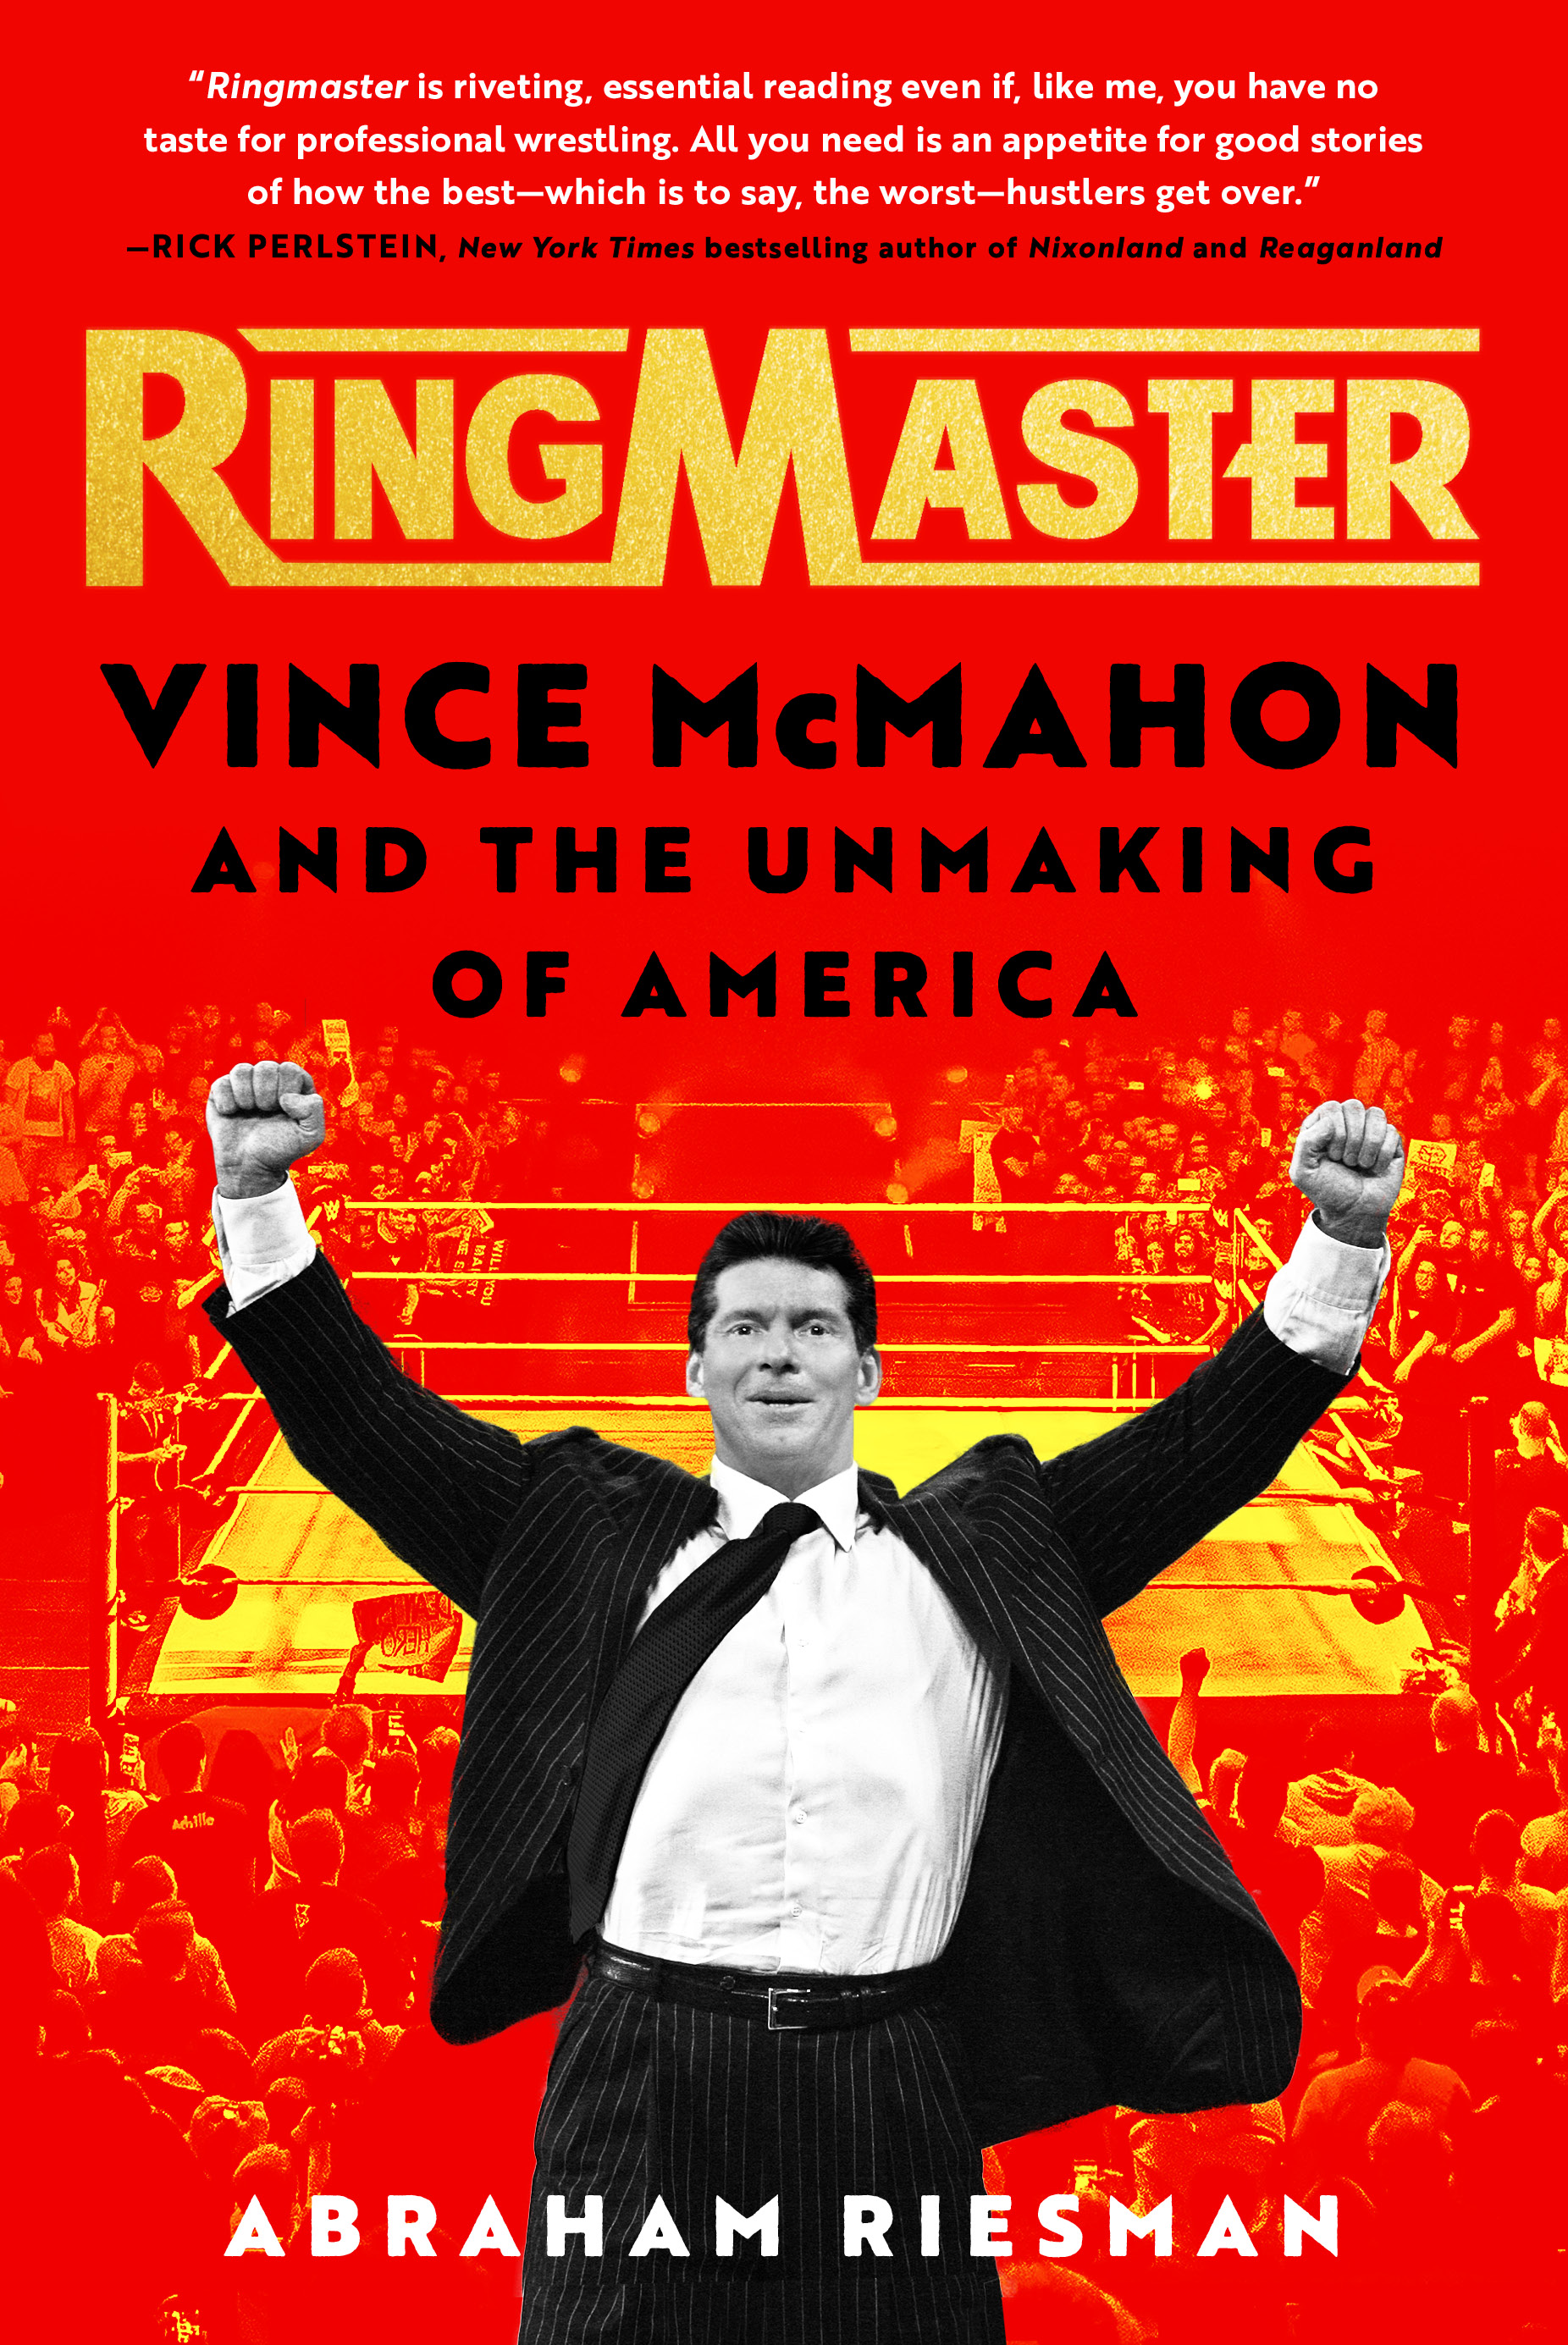 Cover of "Ringmaster: Vince McMahon and the Unmaking of America"